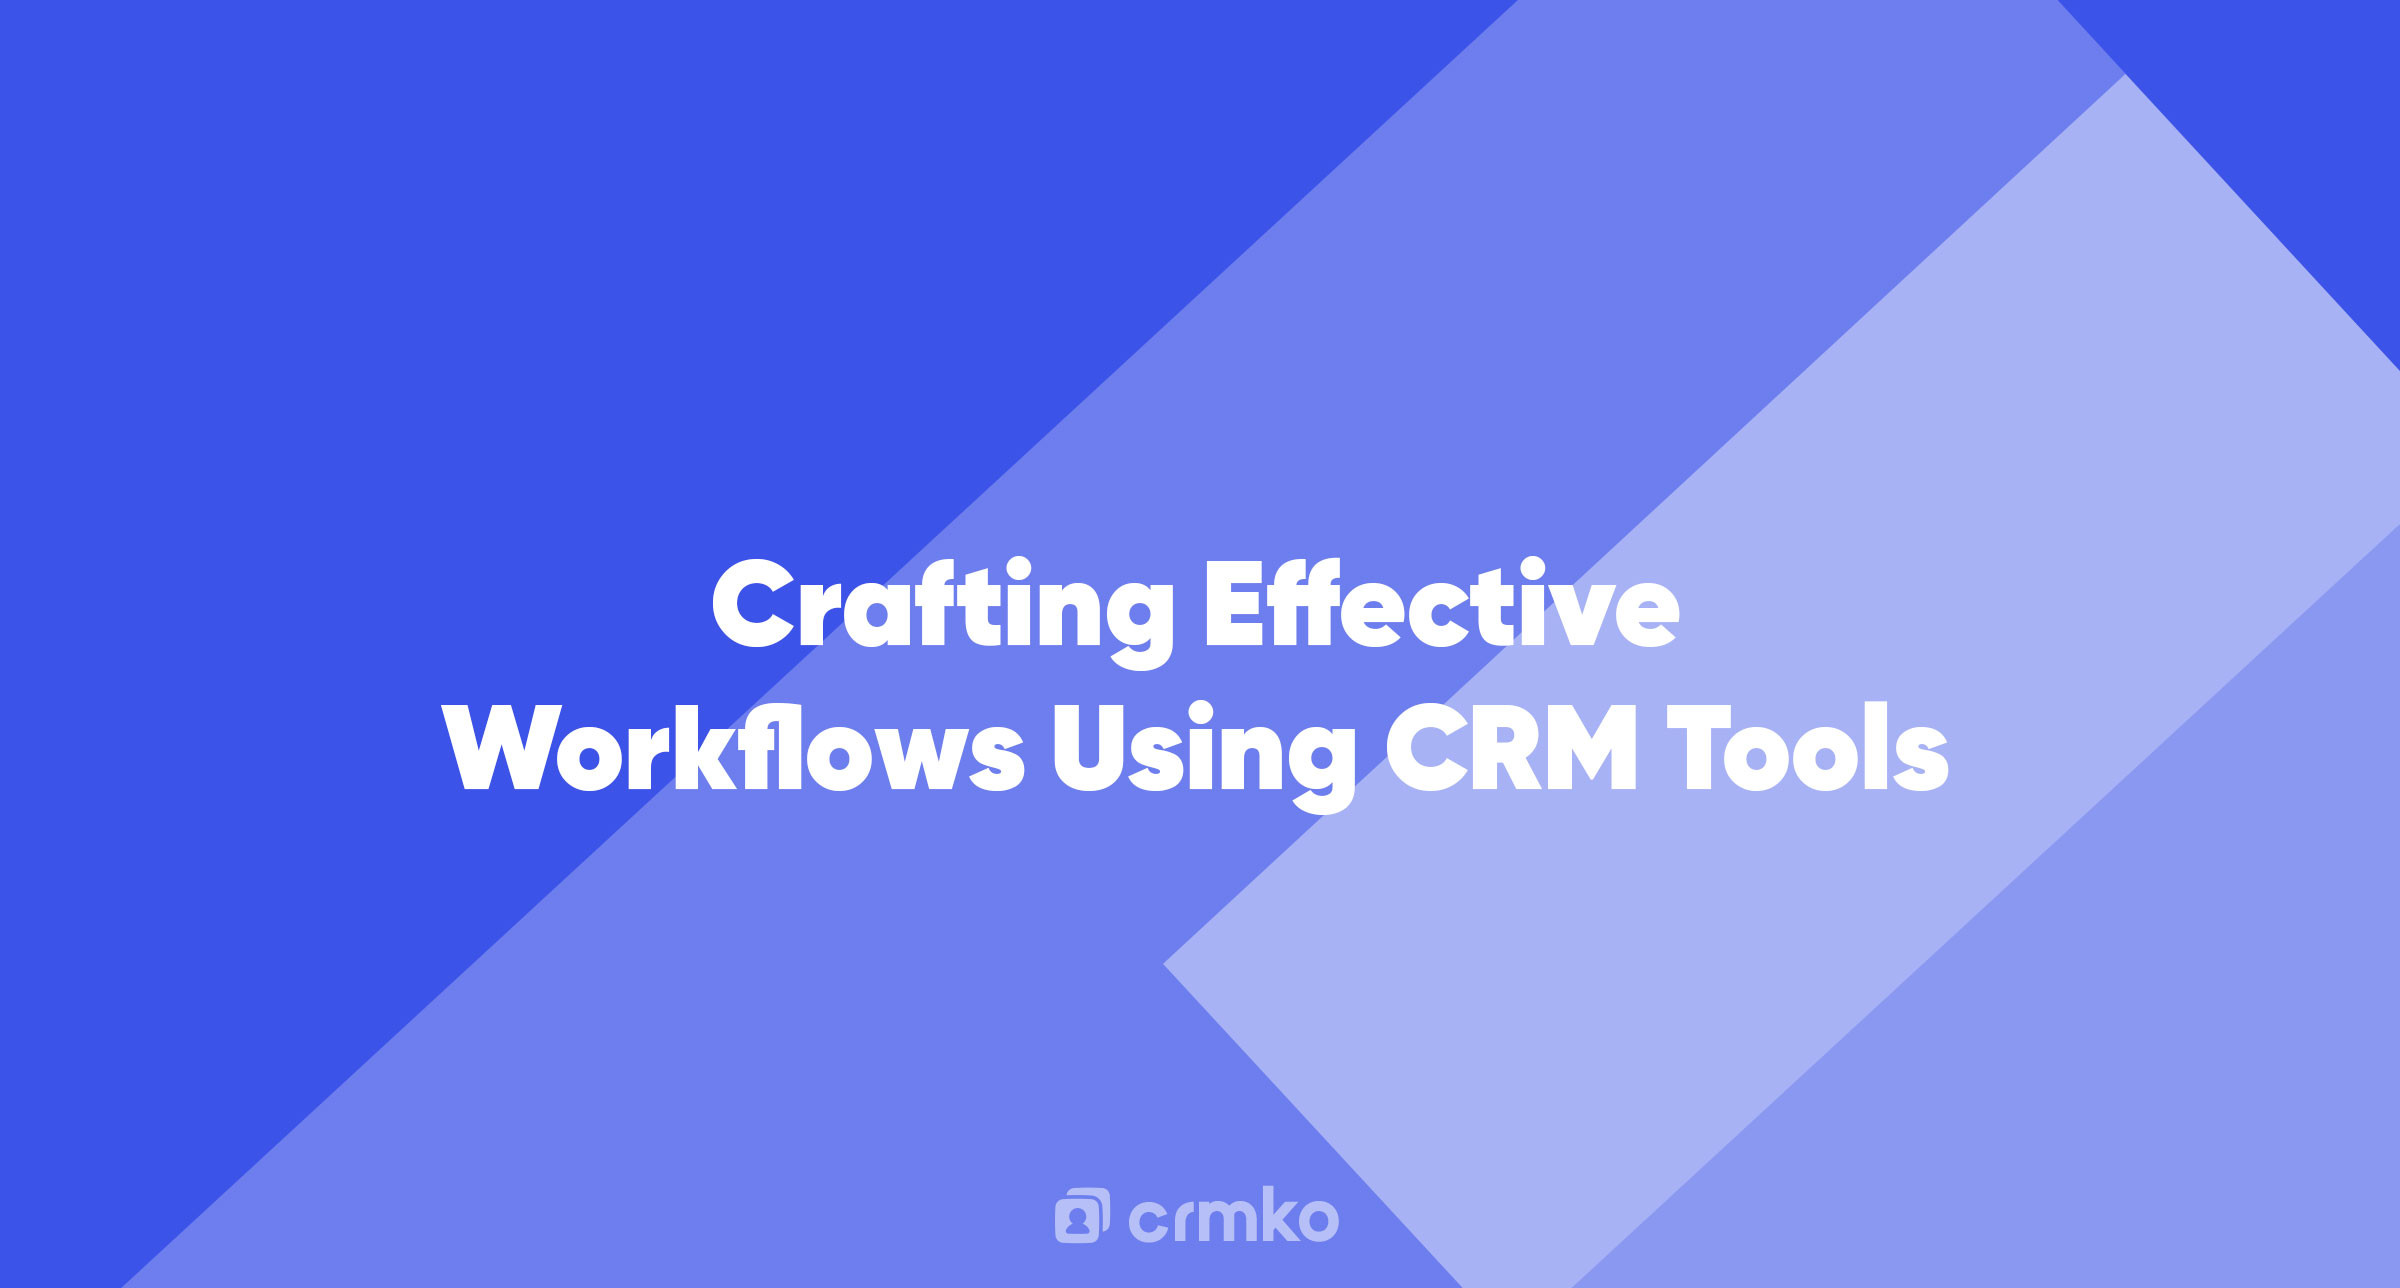 Article | Crafting Effective Workflows Using CRM Tools